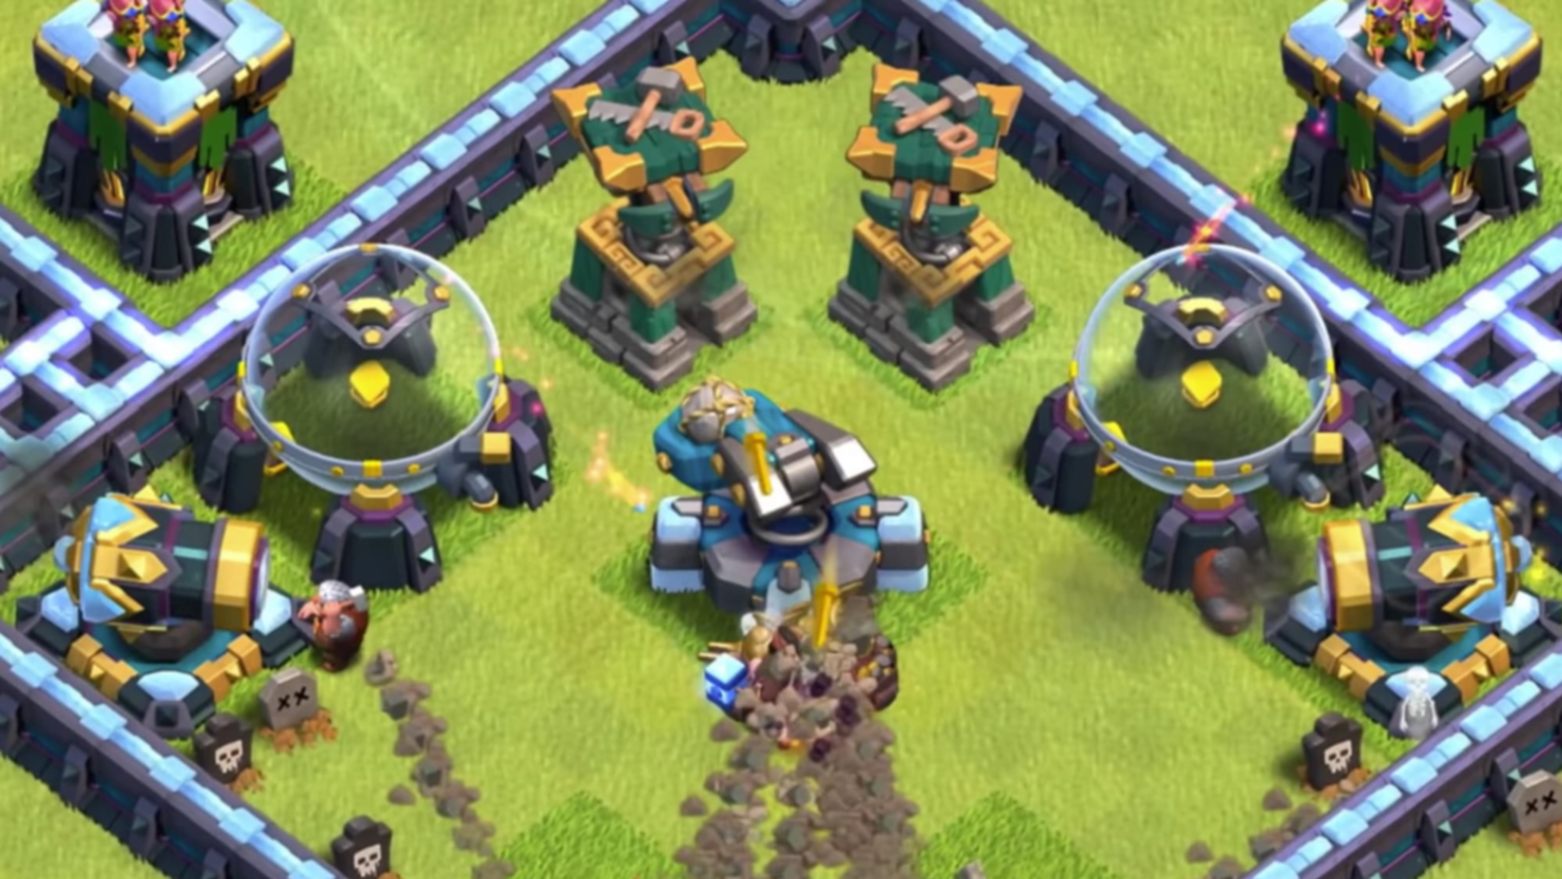 How To Get Gems In Clash Of Clans